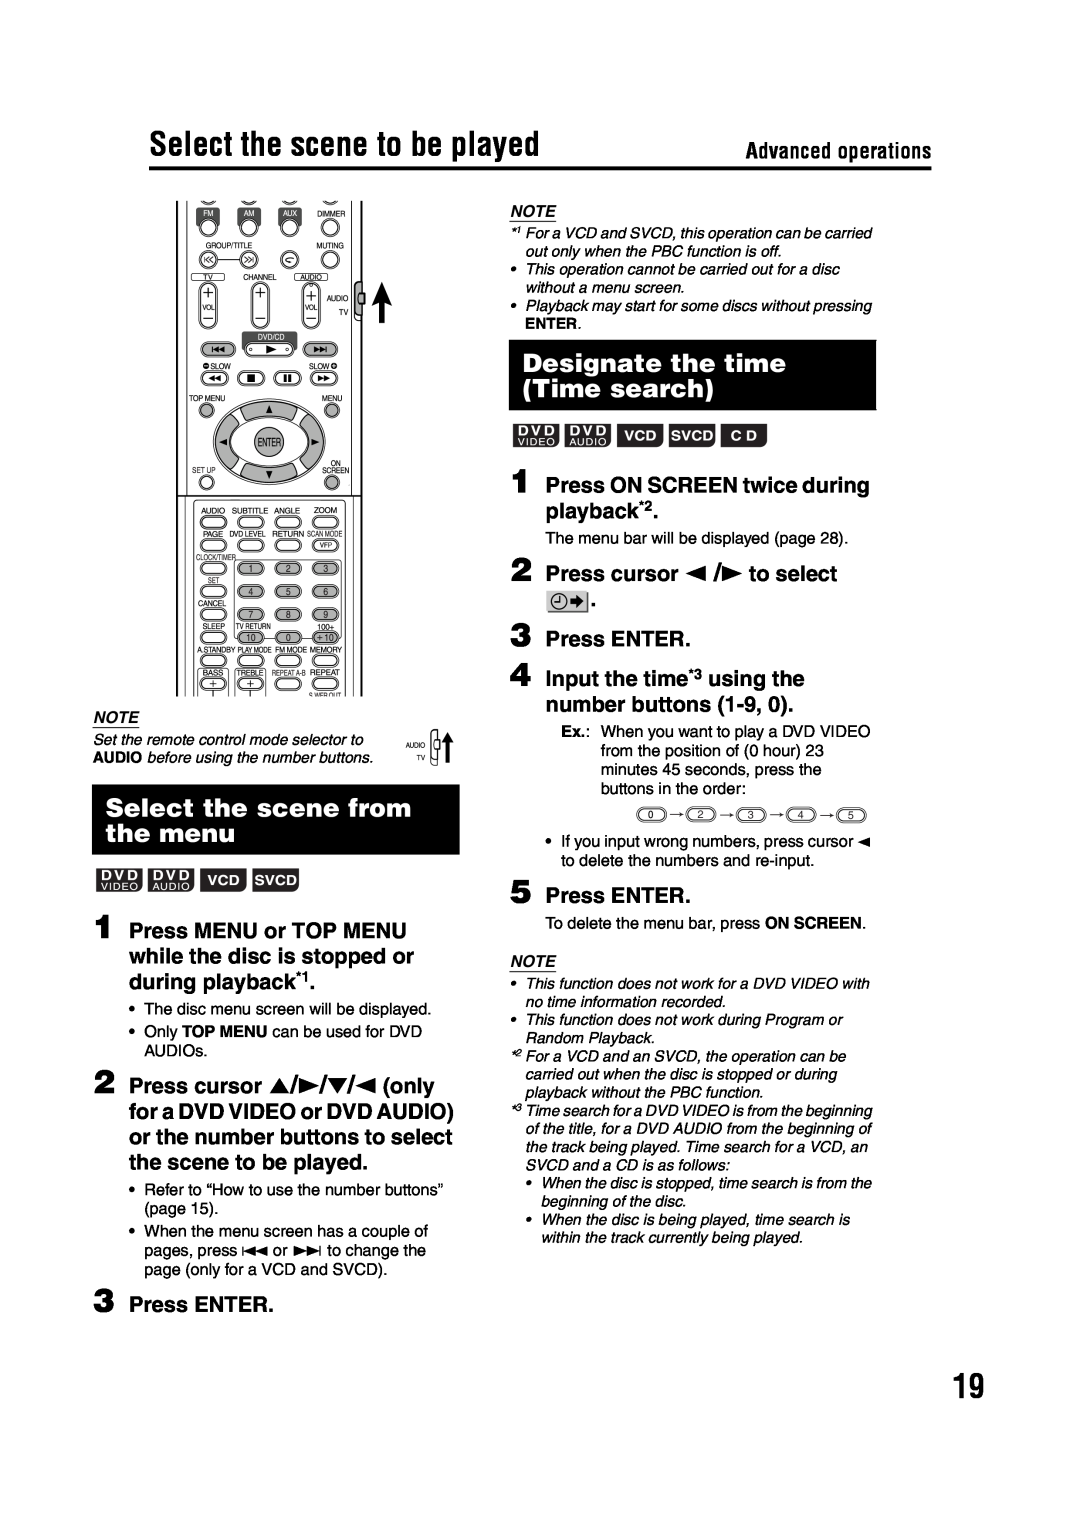 JVC GVT0142-001A manual Select the scene to be played, Select the scene from the menu, Designate the time Time search 